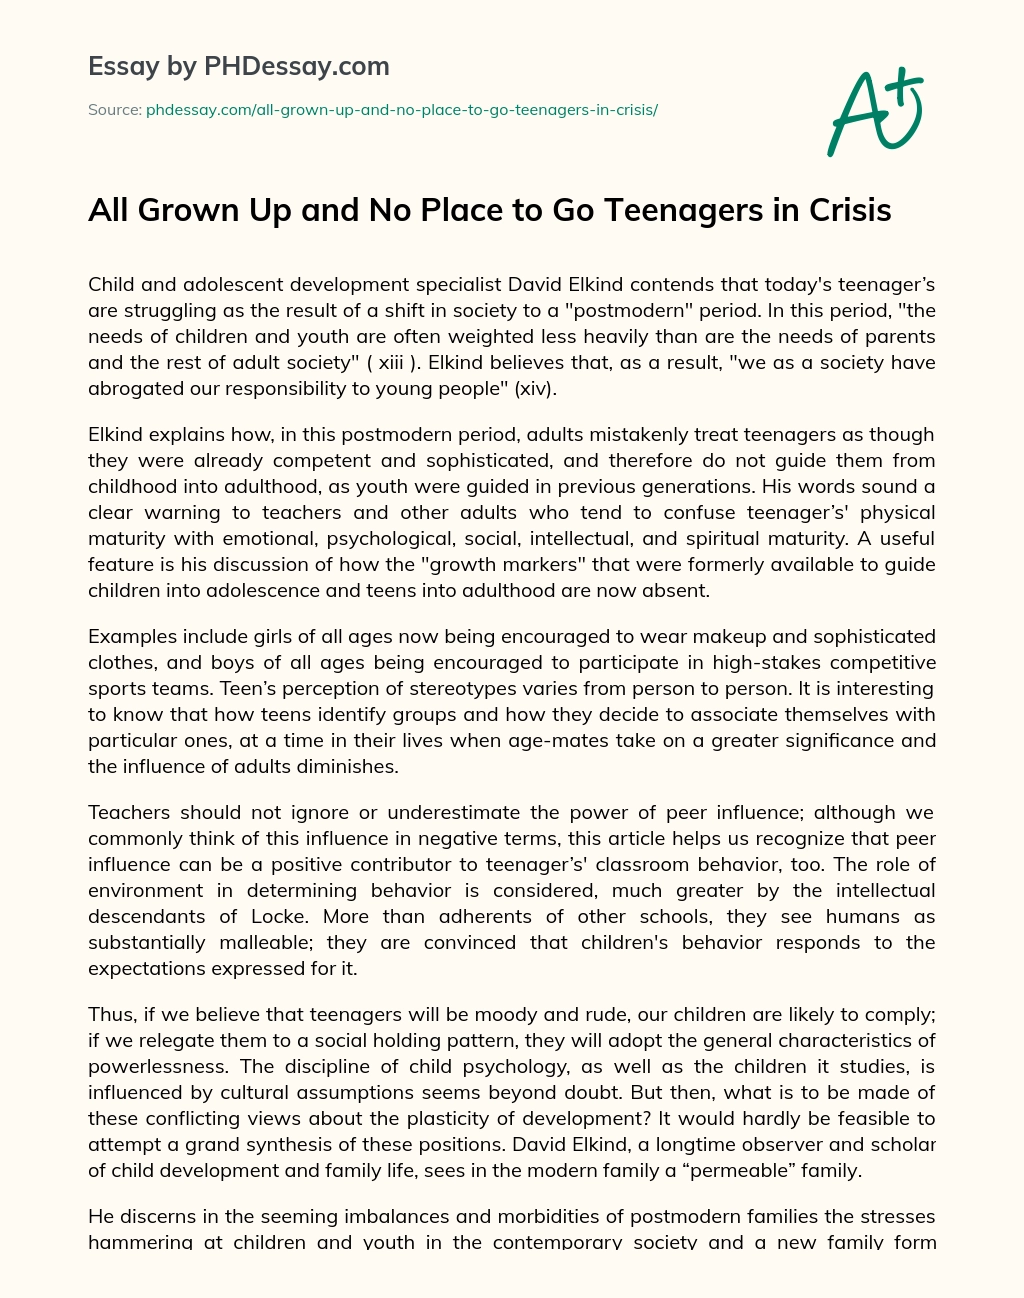 All Grown Up and No Place to Go  Teenagers in Crisis essay